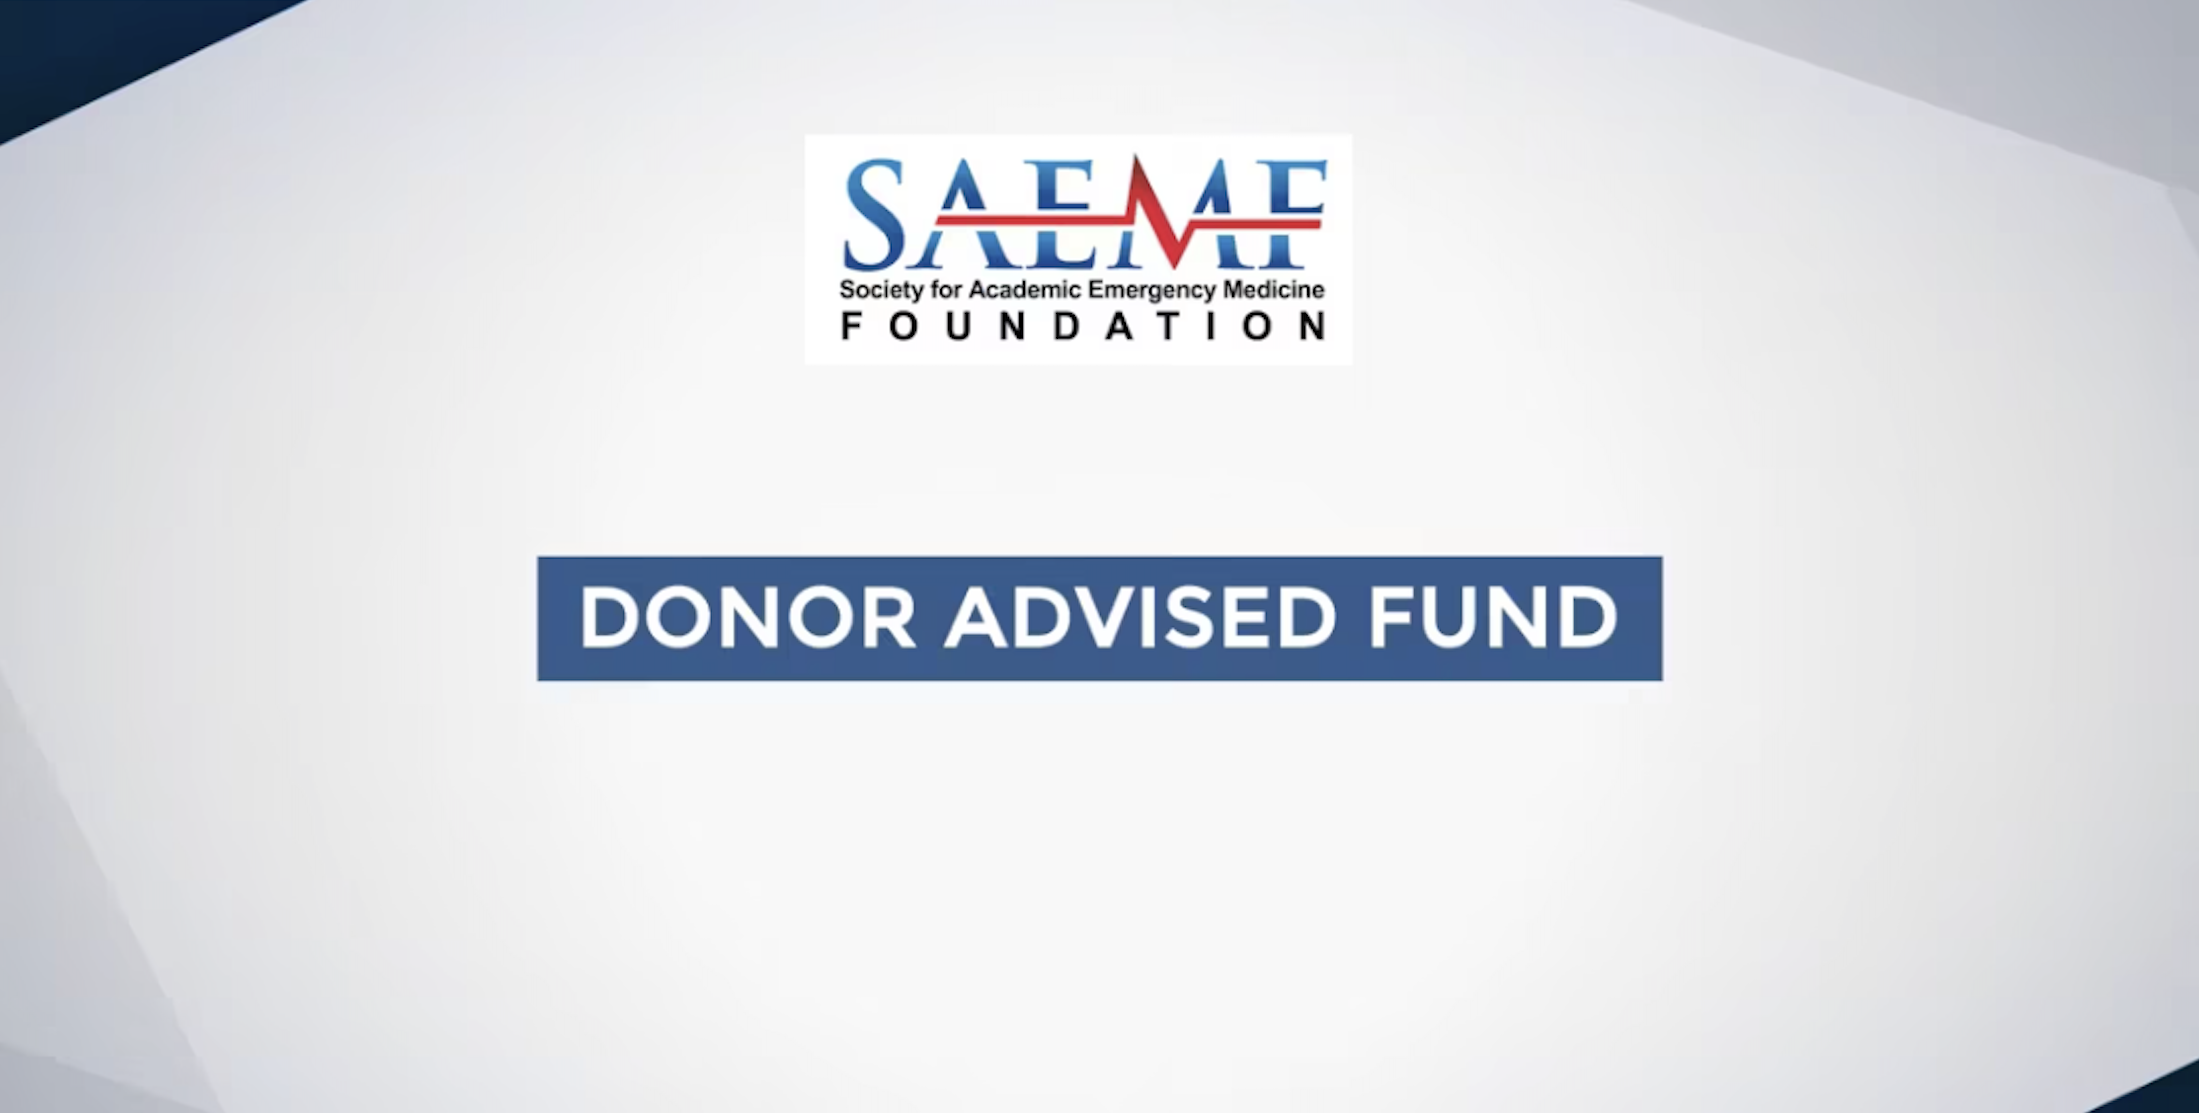 Click here to learn more about Donor Advised Funds.